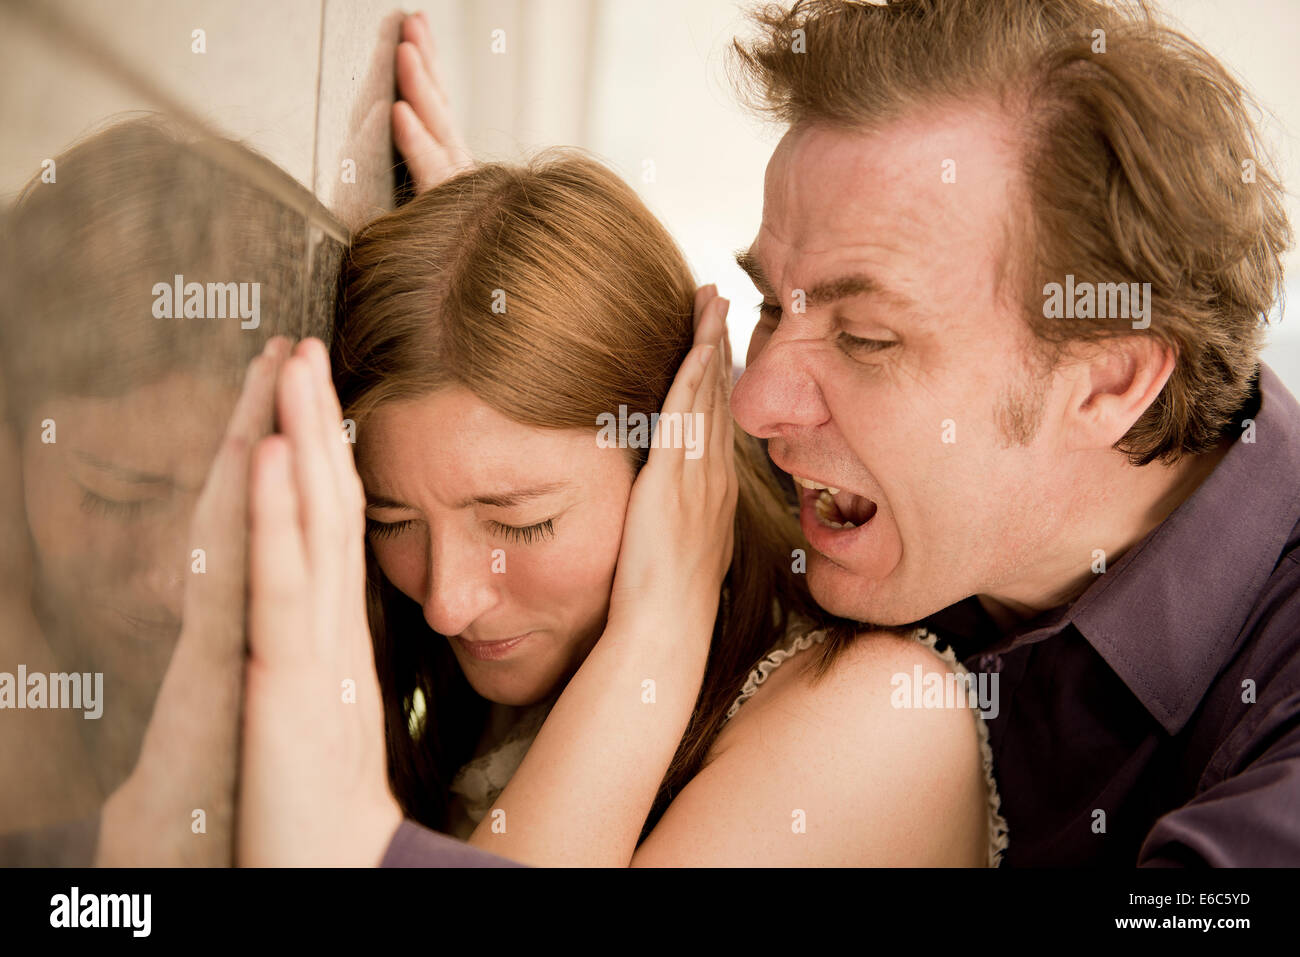 Angry man shouting and being threatening against a helpless woman. Stock Photo